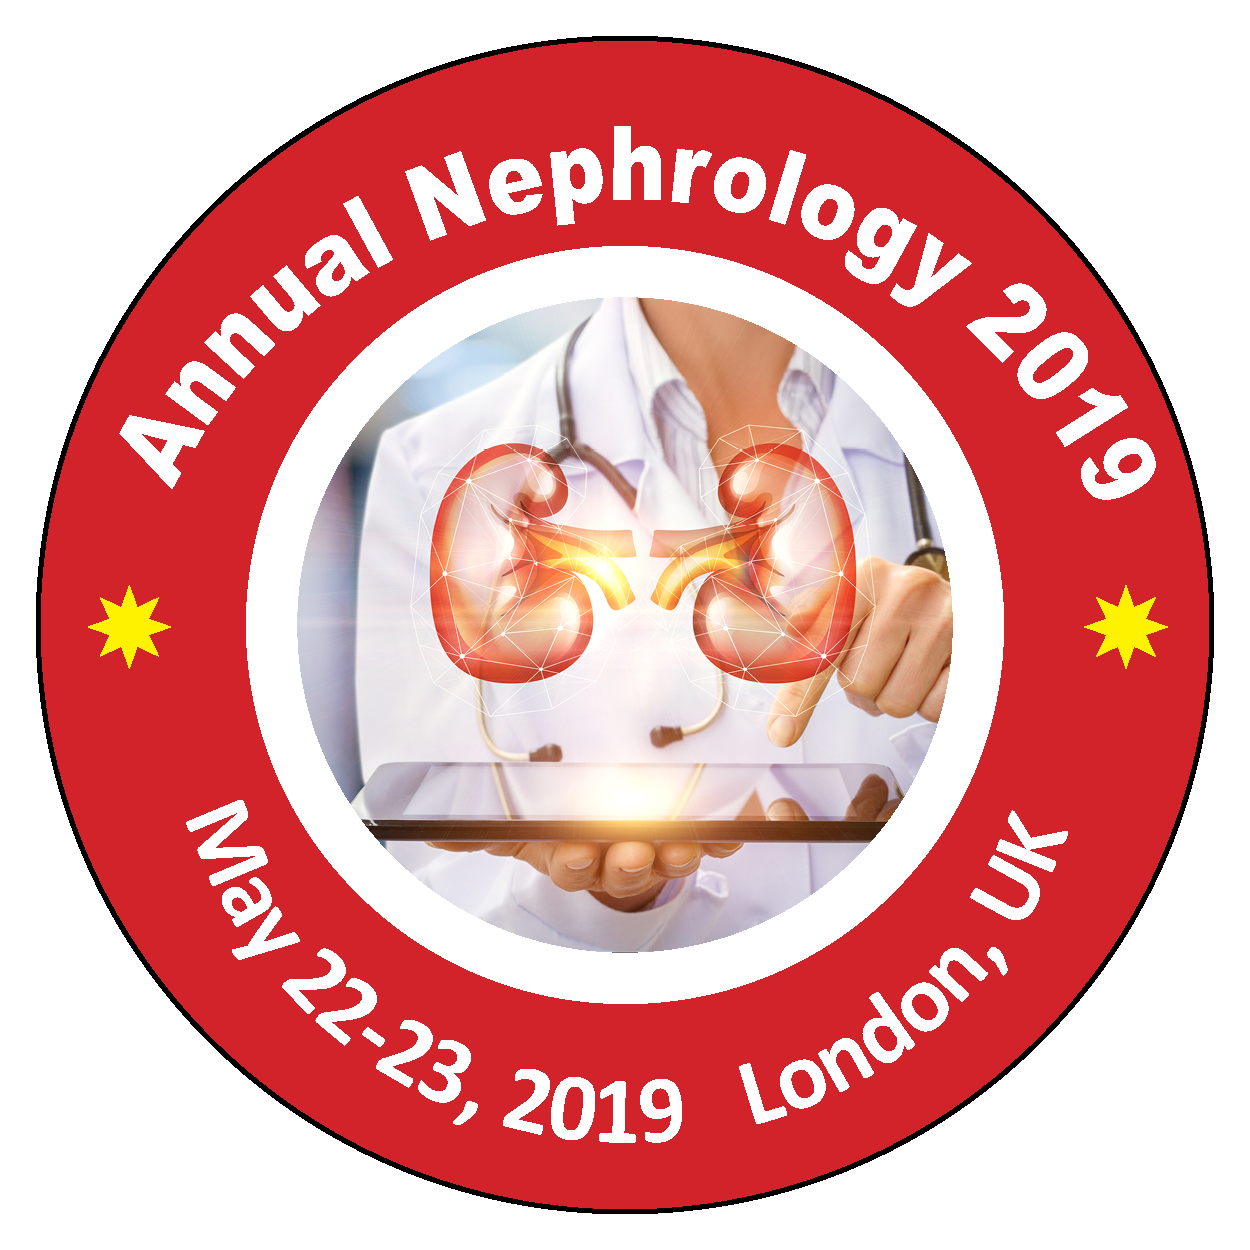 Photos of 19th Annual Conference on Nephrology